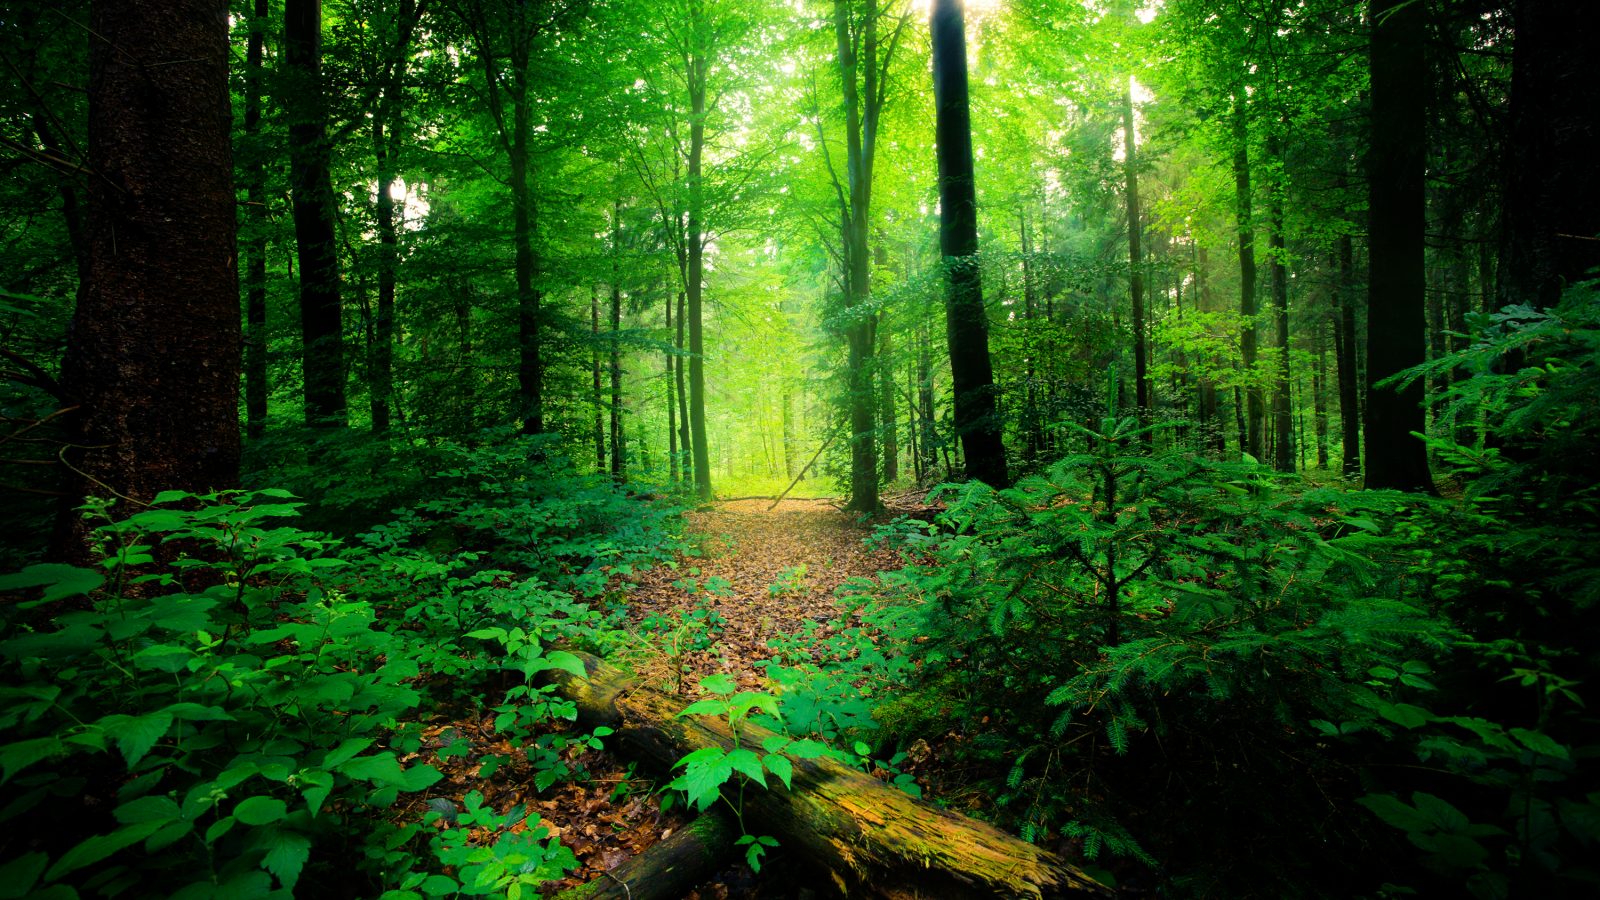 An image of a lush, green forest.